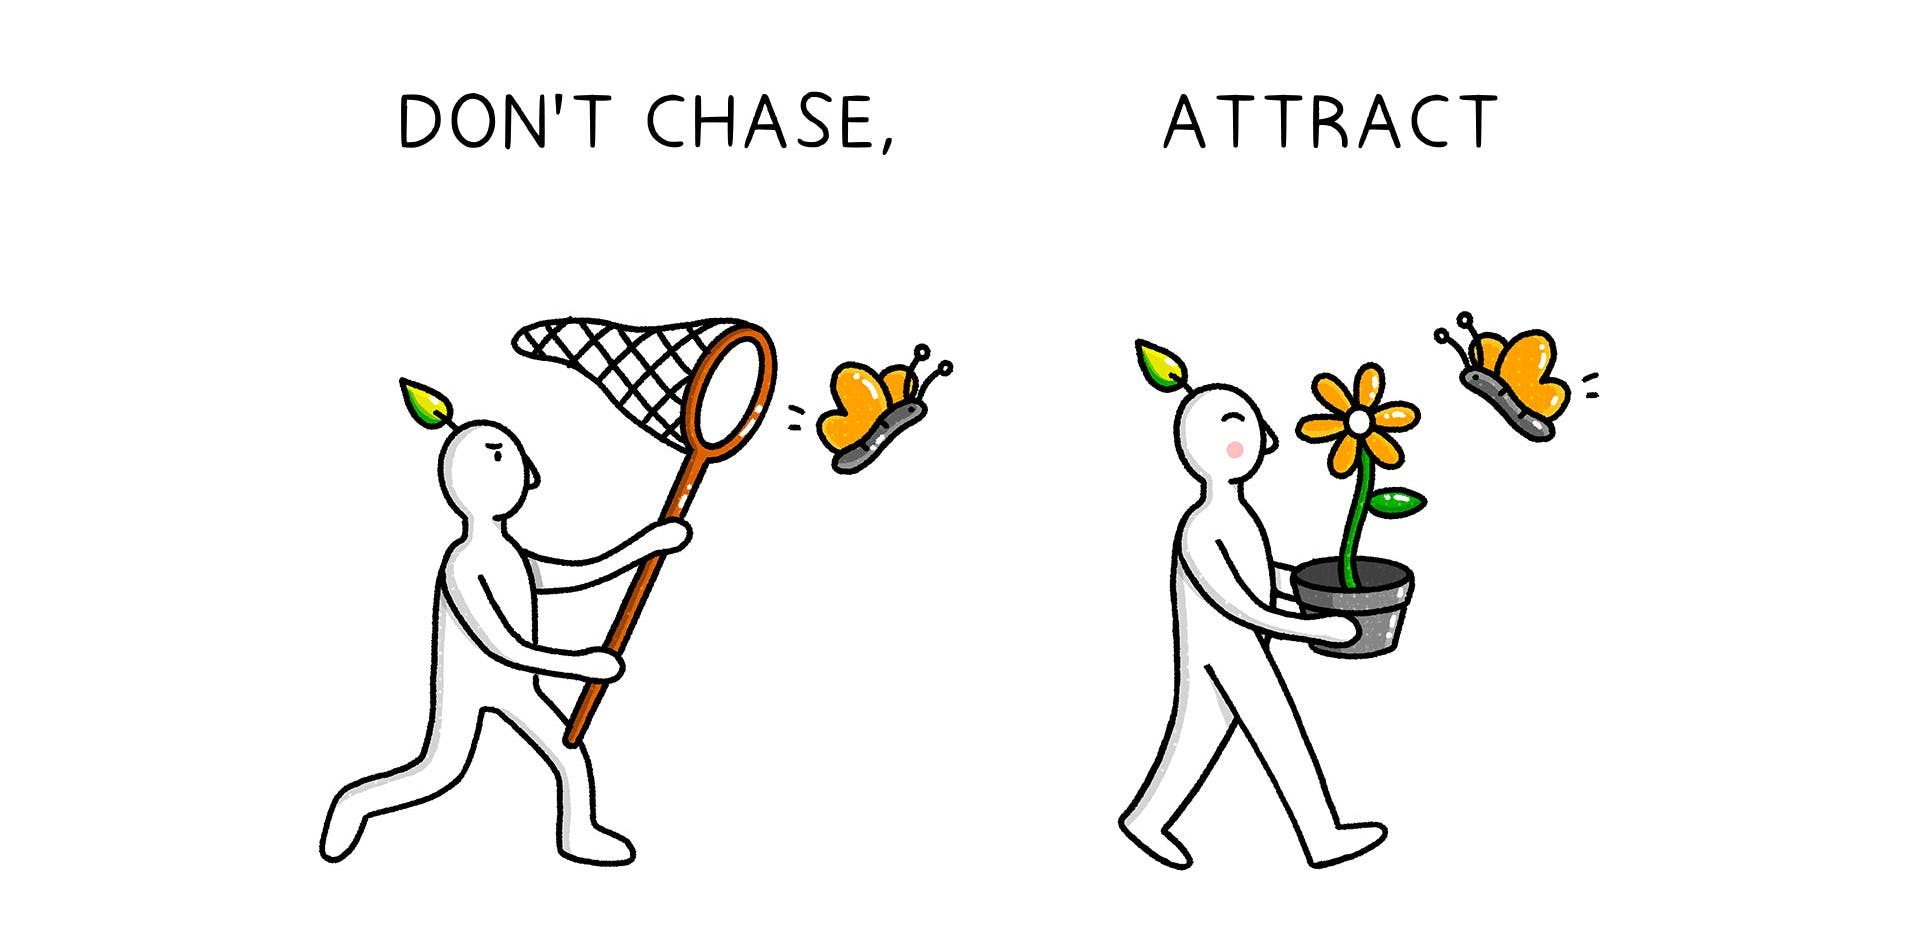 Don't chase, attract, with illustration